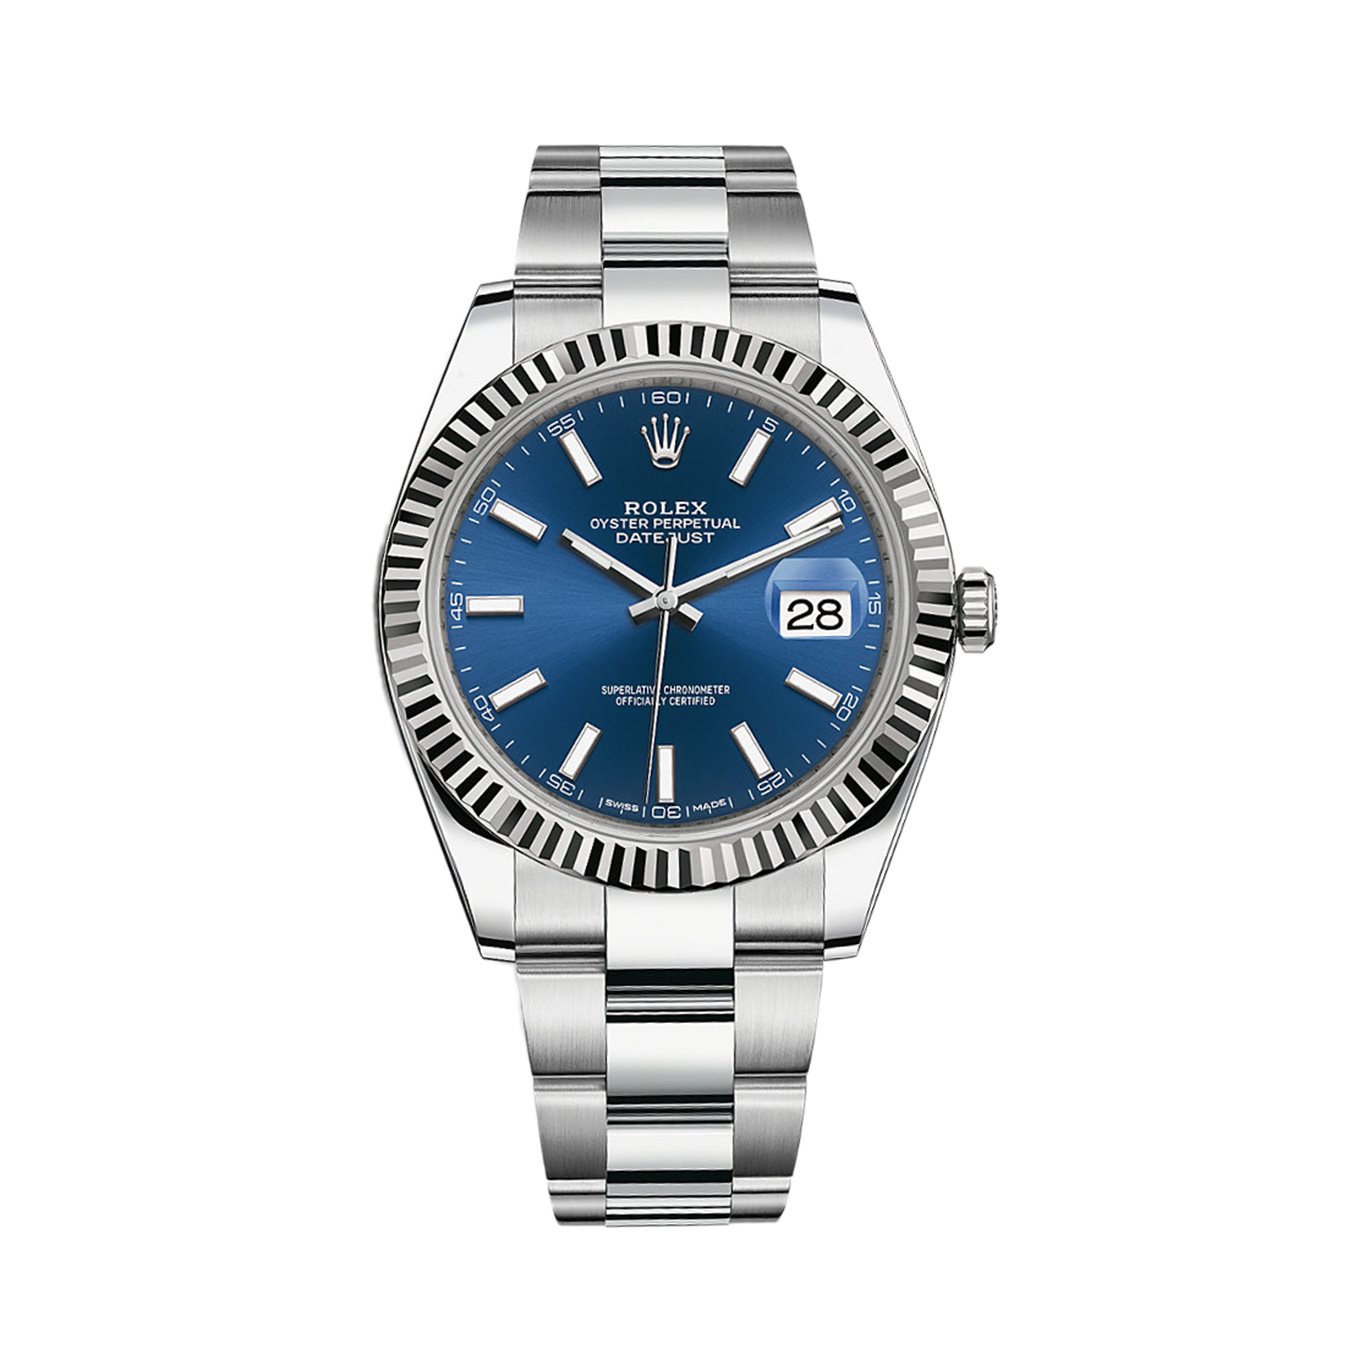 Datejust 41 126334 White Gold & Stainless Steel Watch (Blue)